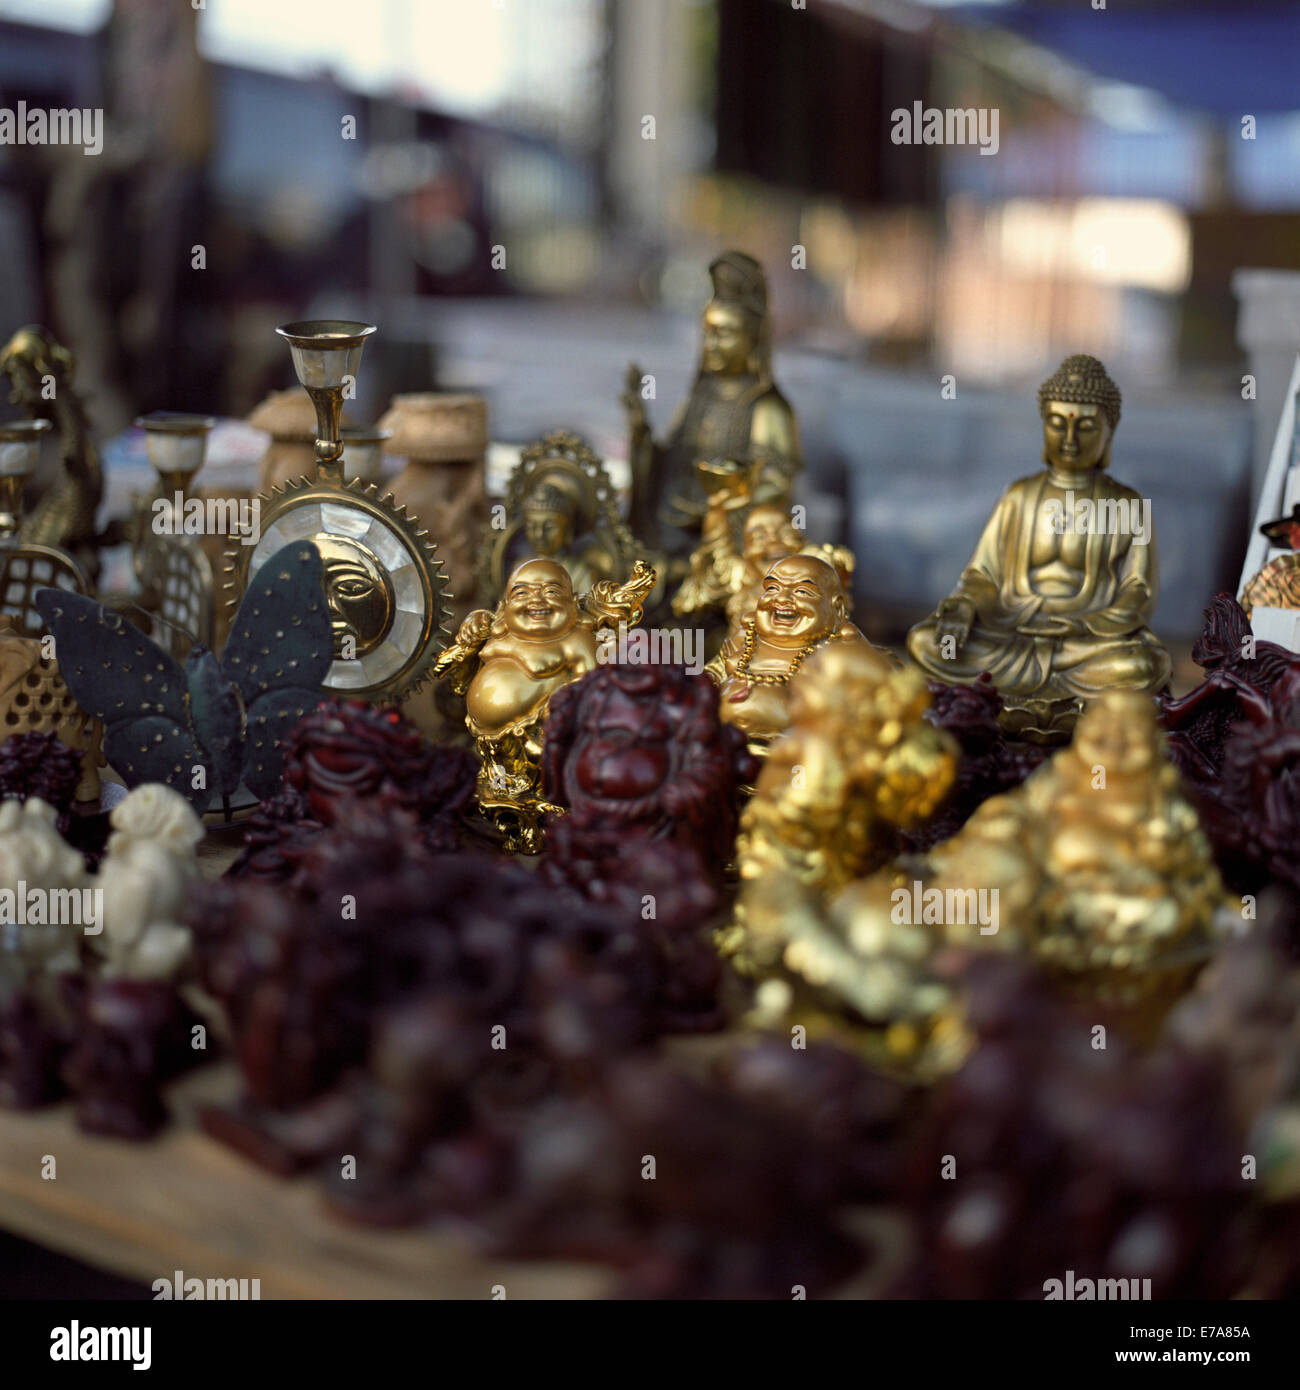 A collection of various Buddha statues for sale at a flea market Stock Photo